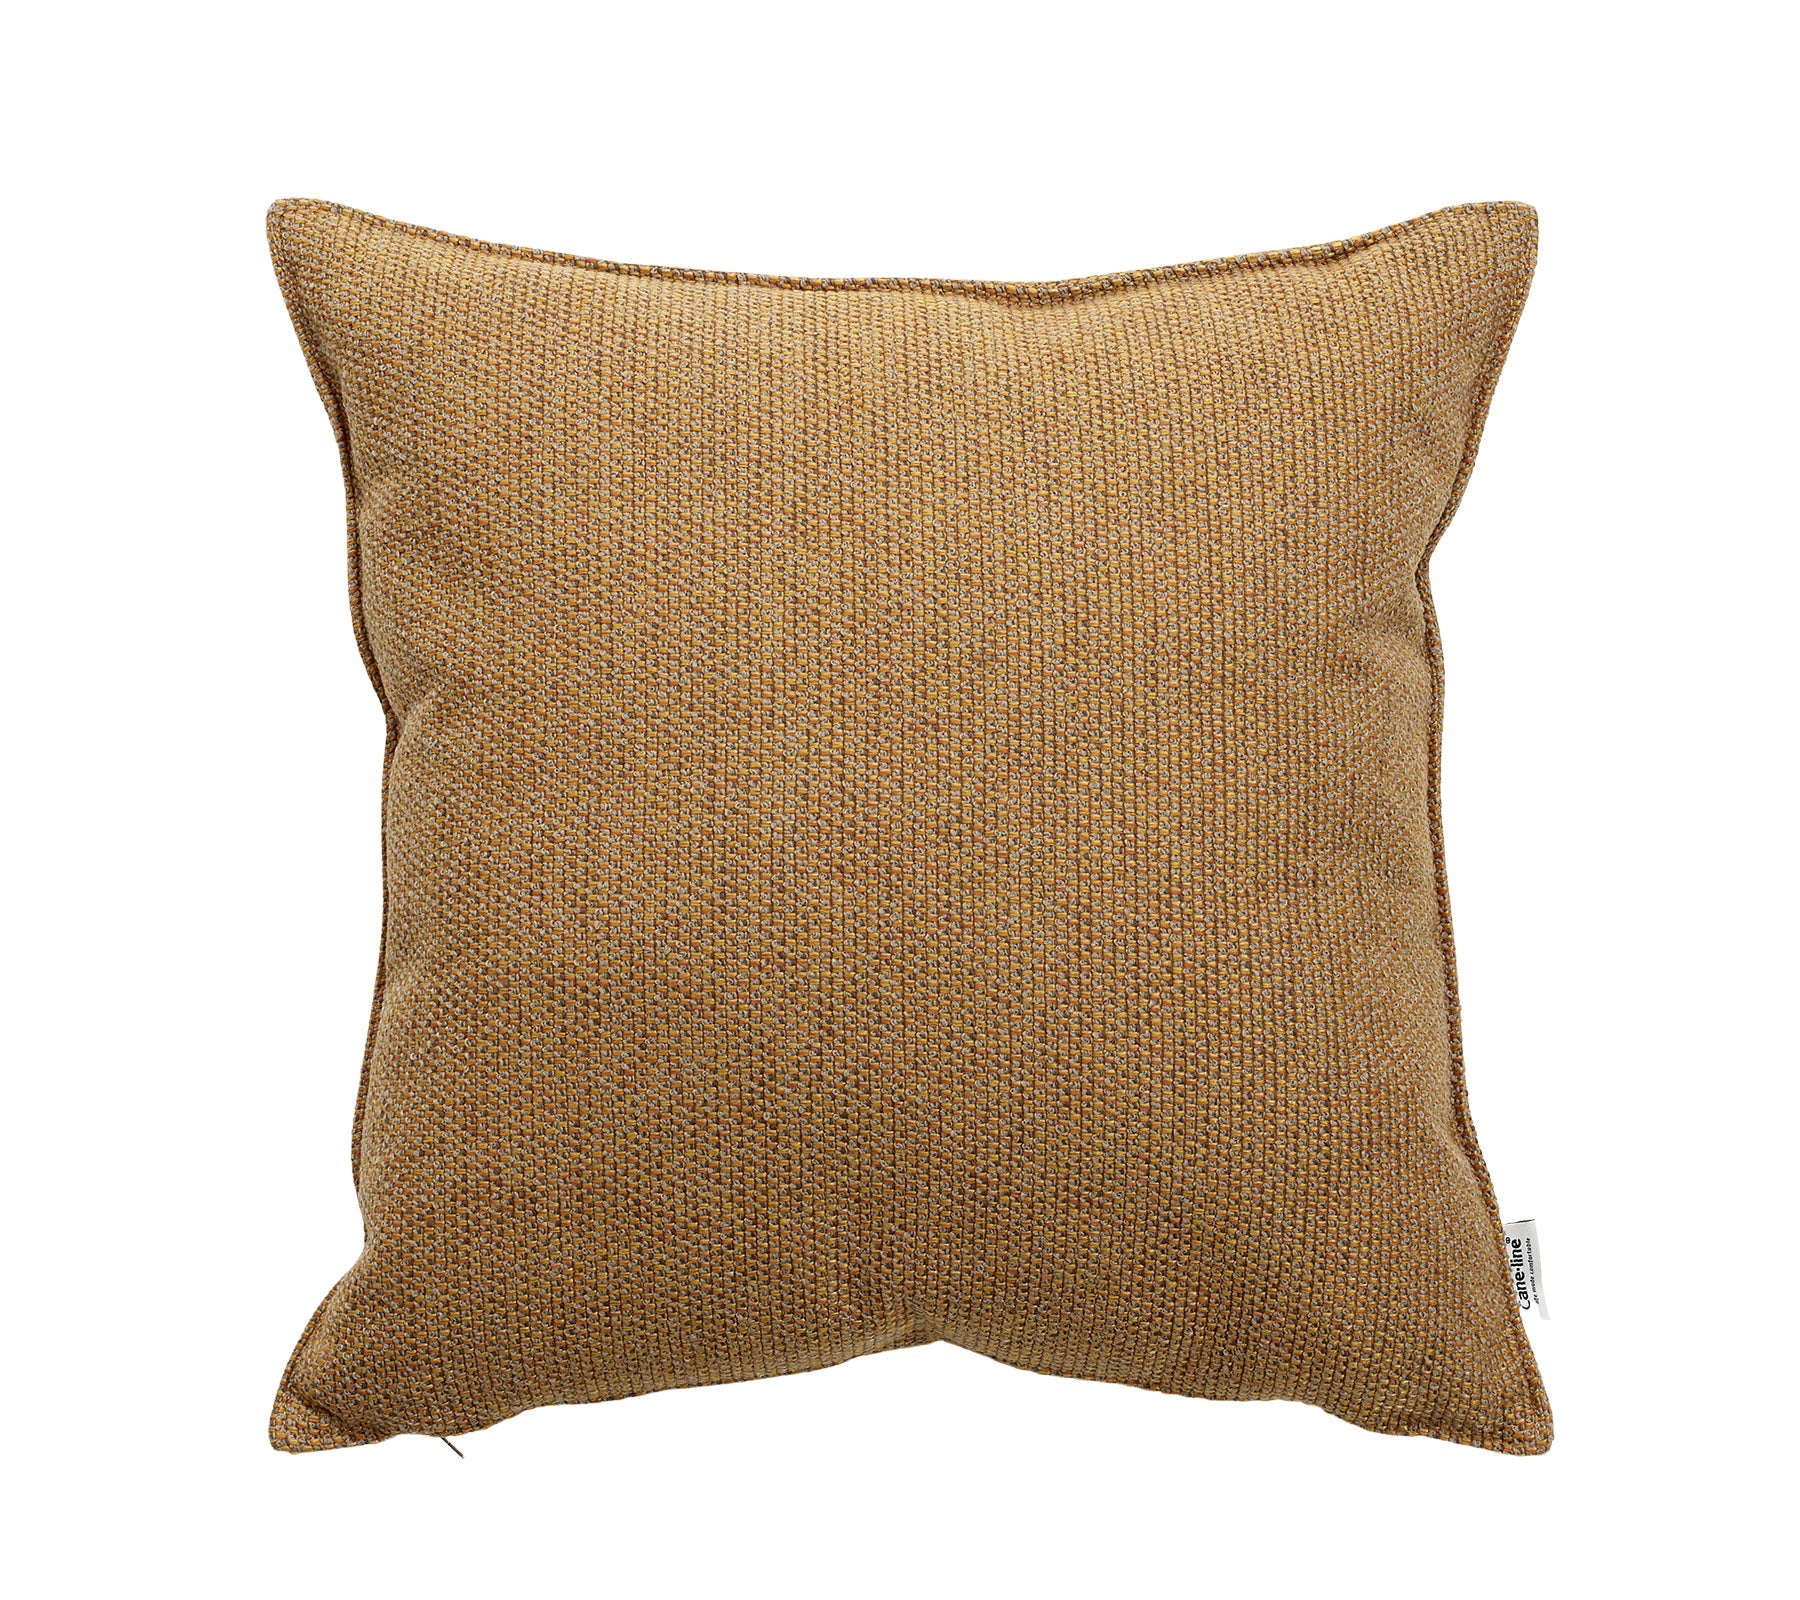 Cane-line Wove Scatter Cushion, 50X50X12 Cm 5240Y120